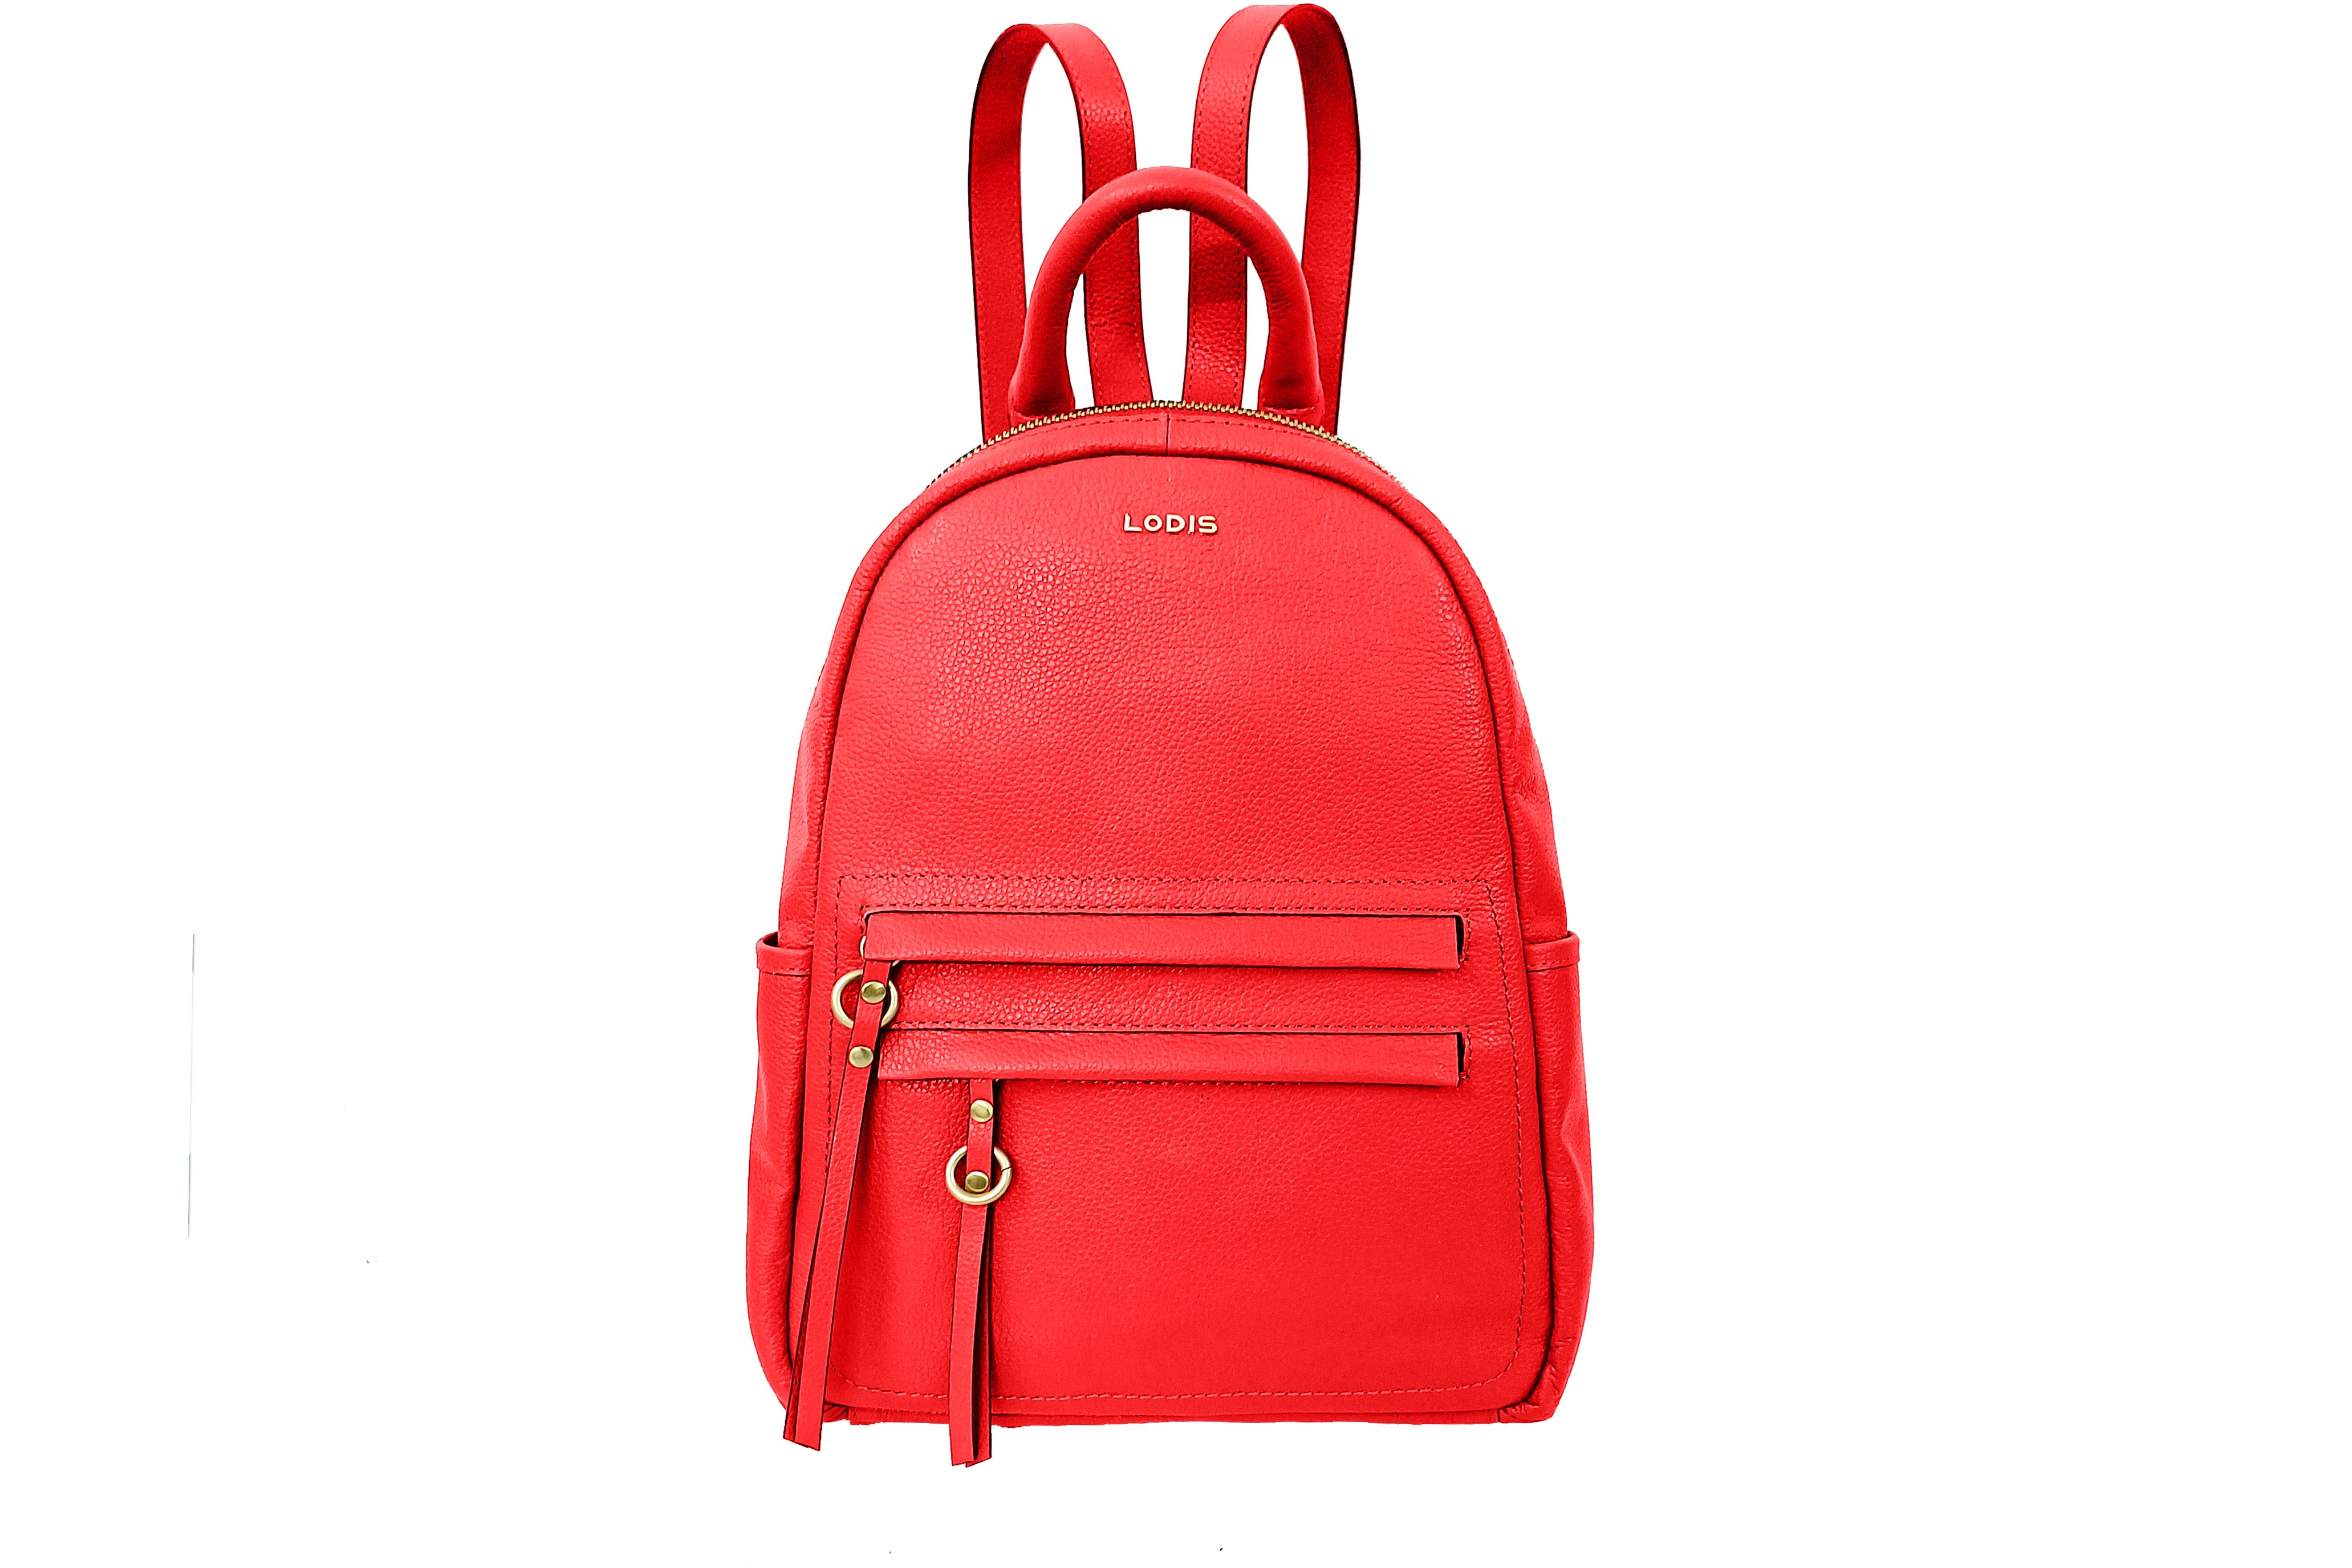 Amelie Leather Backpack red